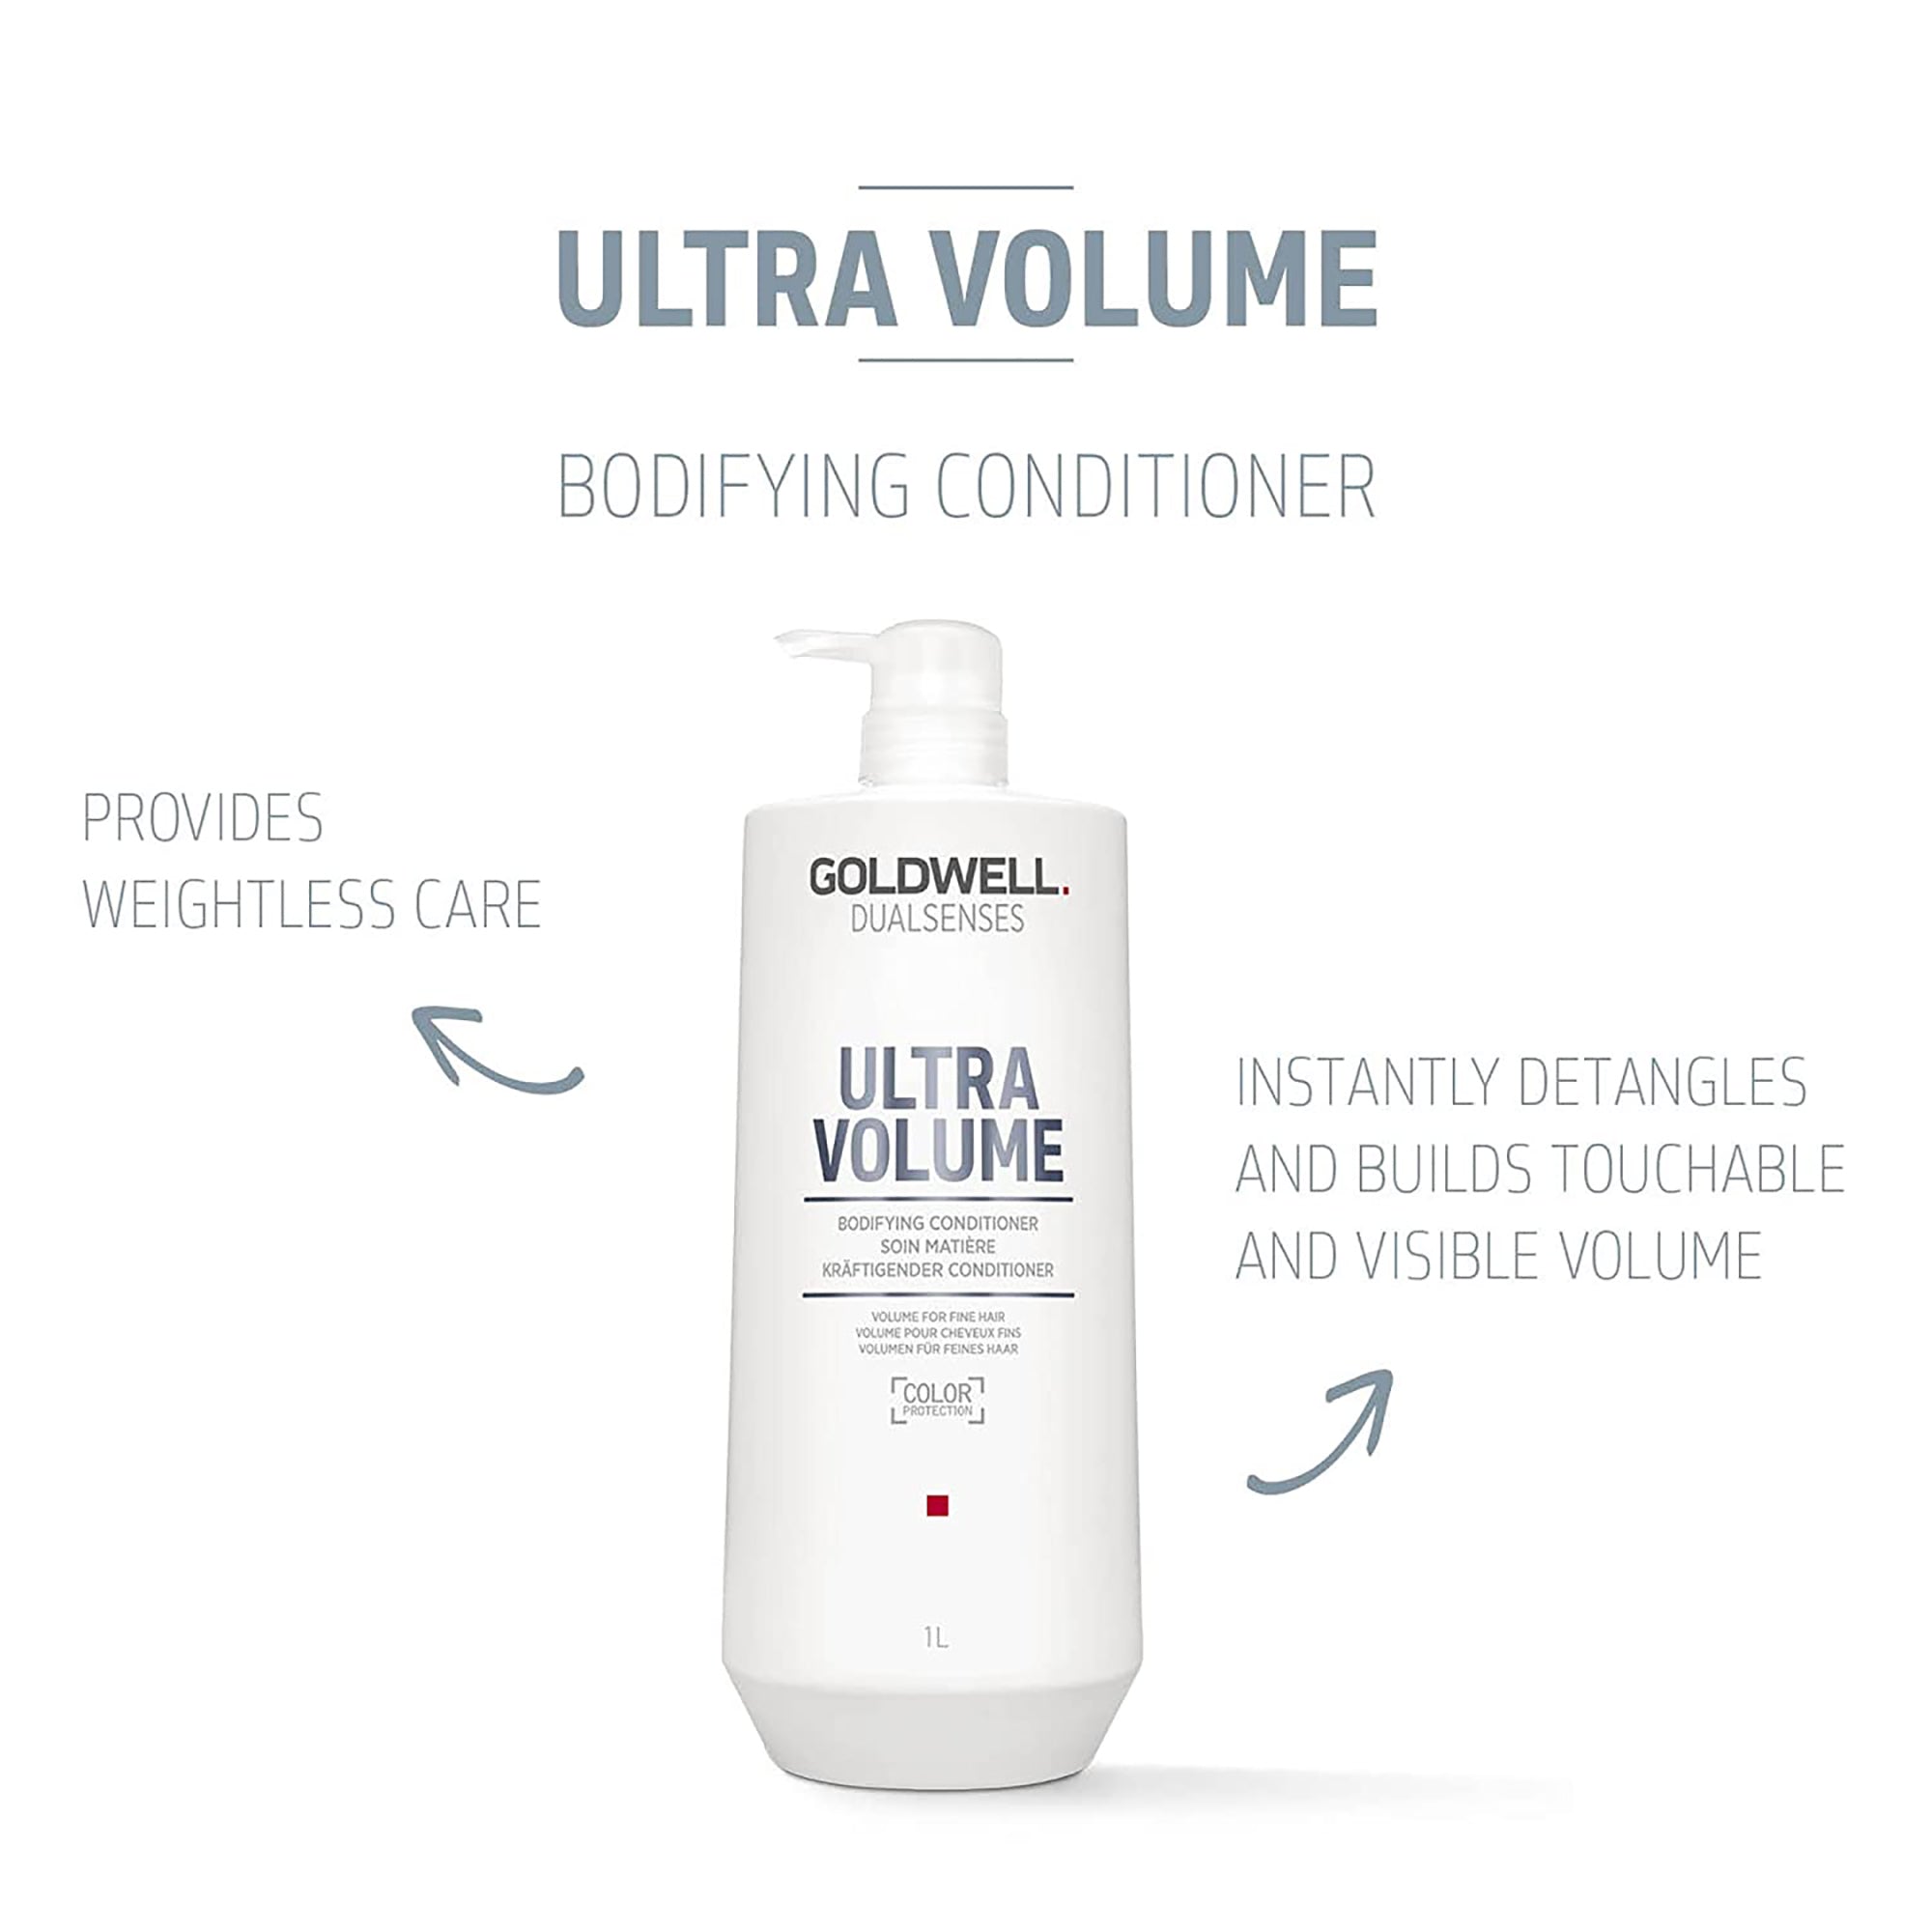 Goldwell Dual Sense Ultra Volume Shampoo and Conditioner Liter Duo ($85 Value) / 33OZ